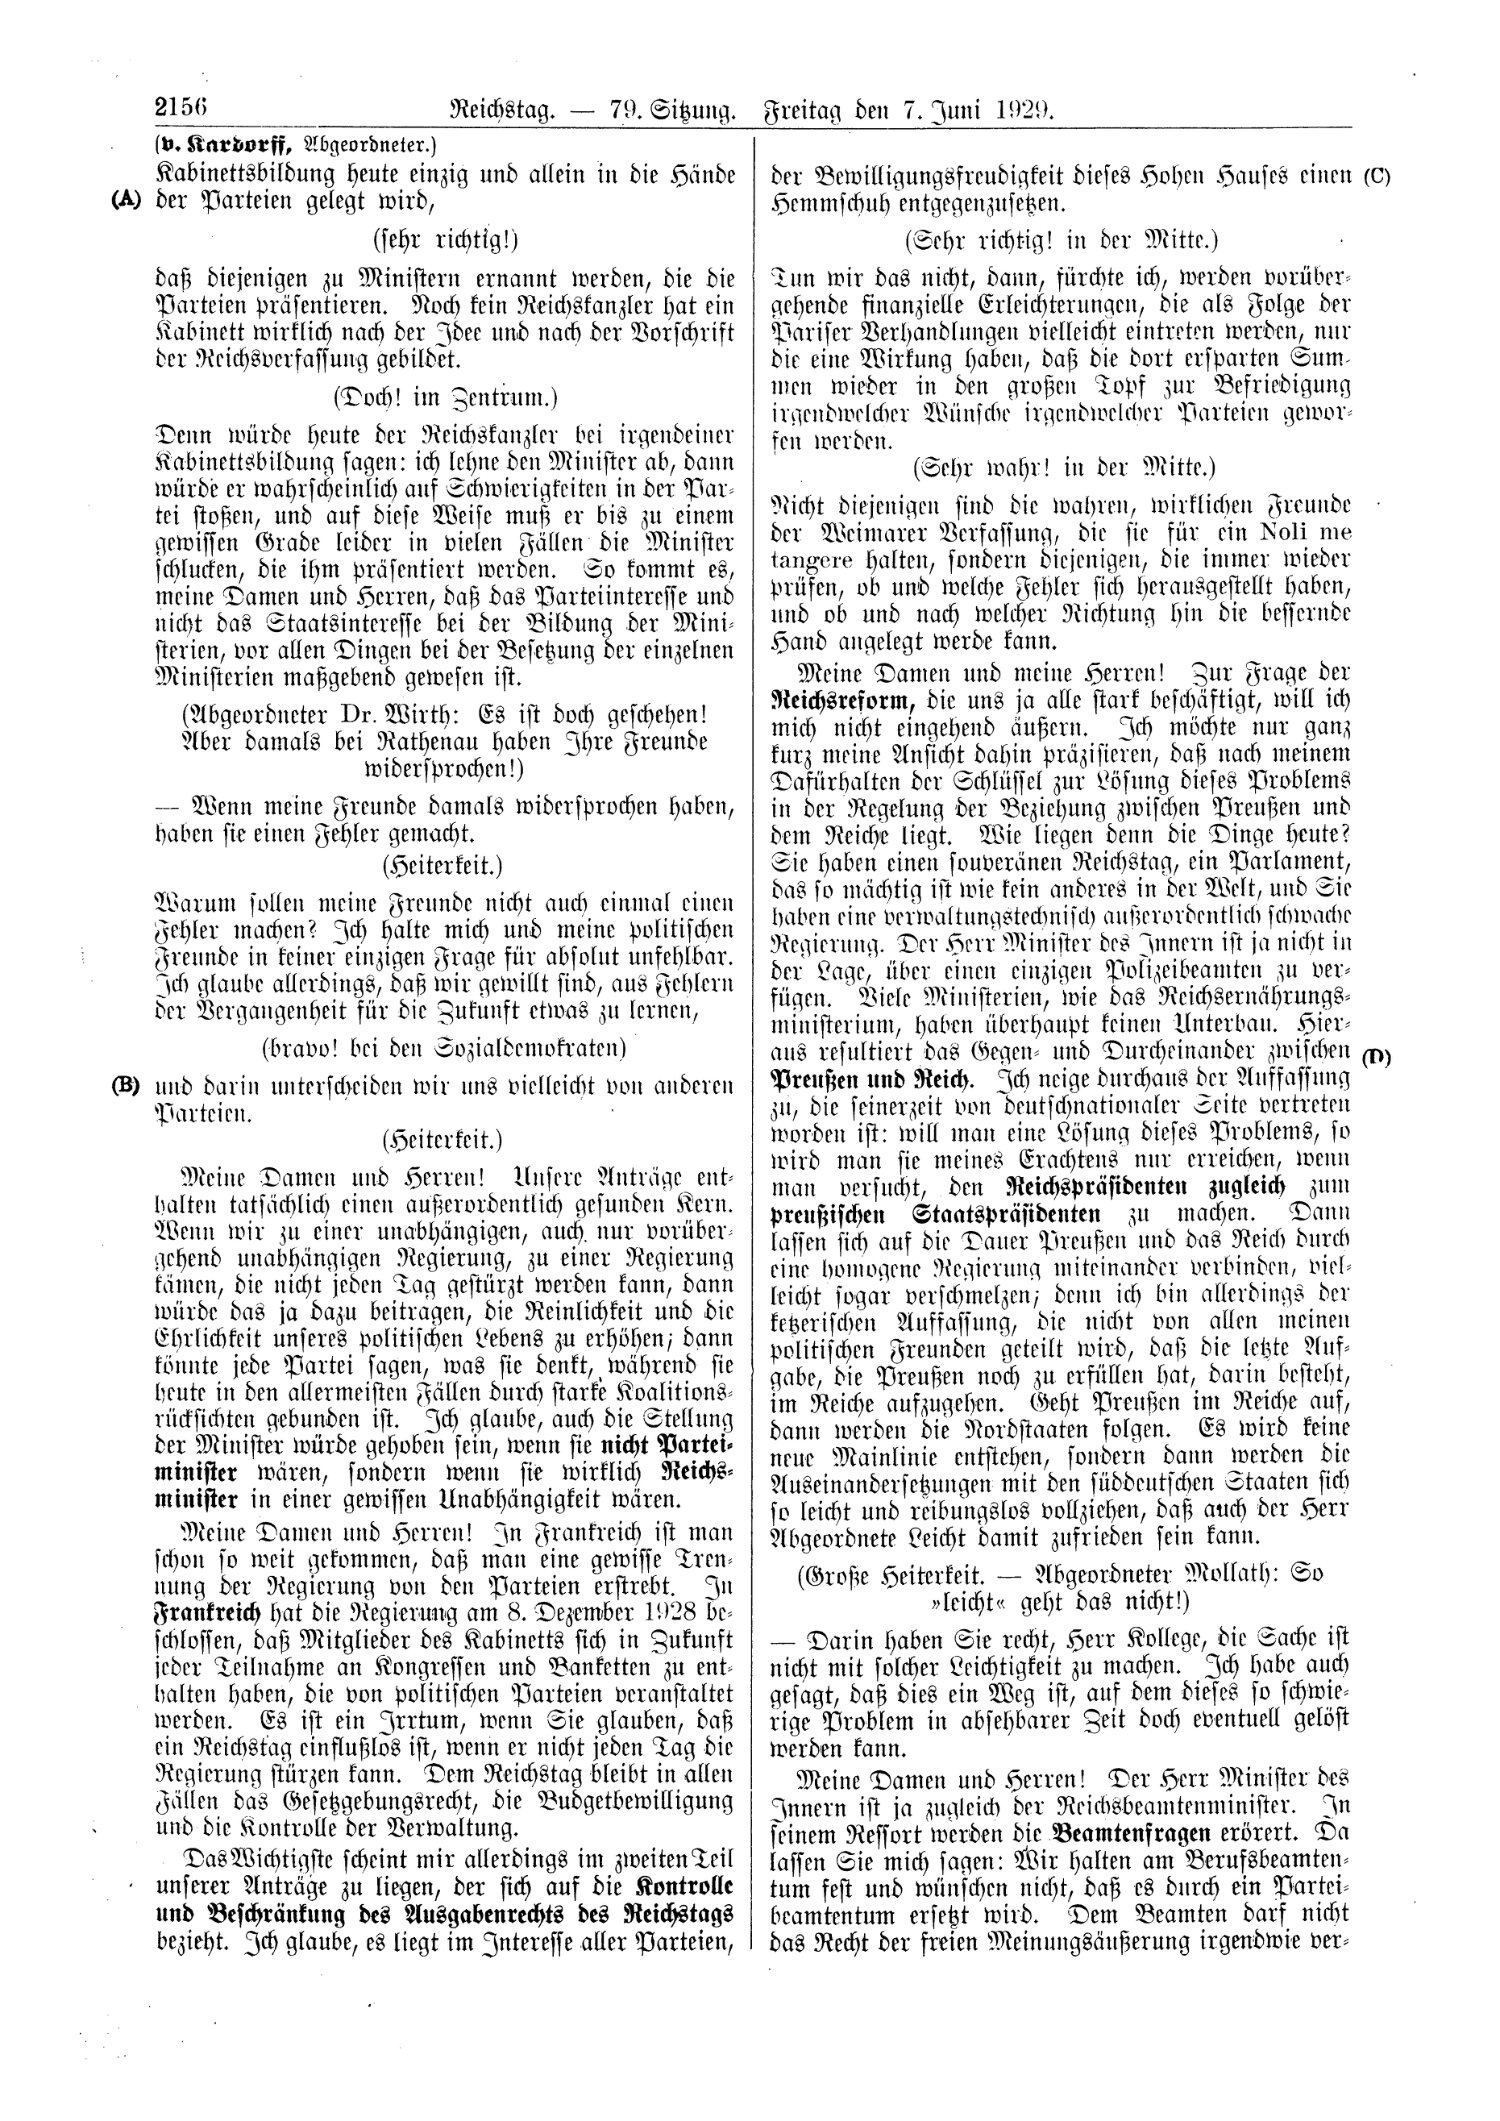 Scan of page 2156